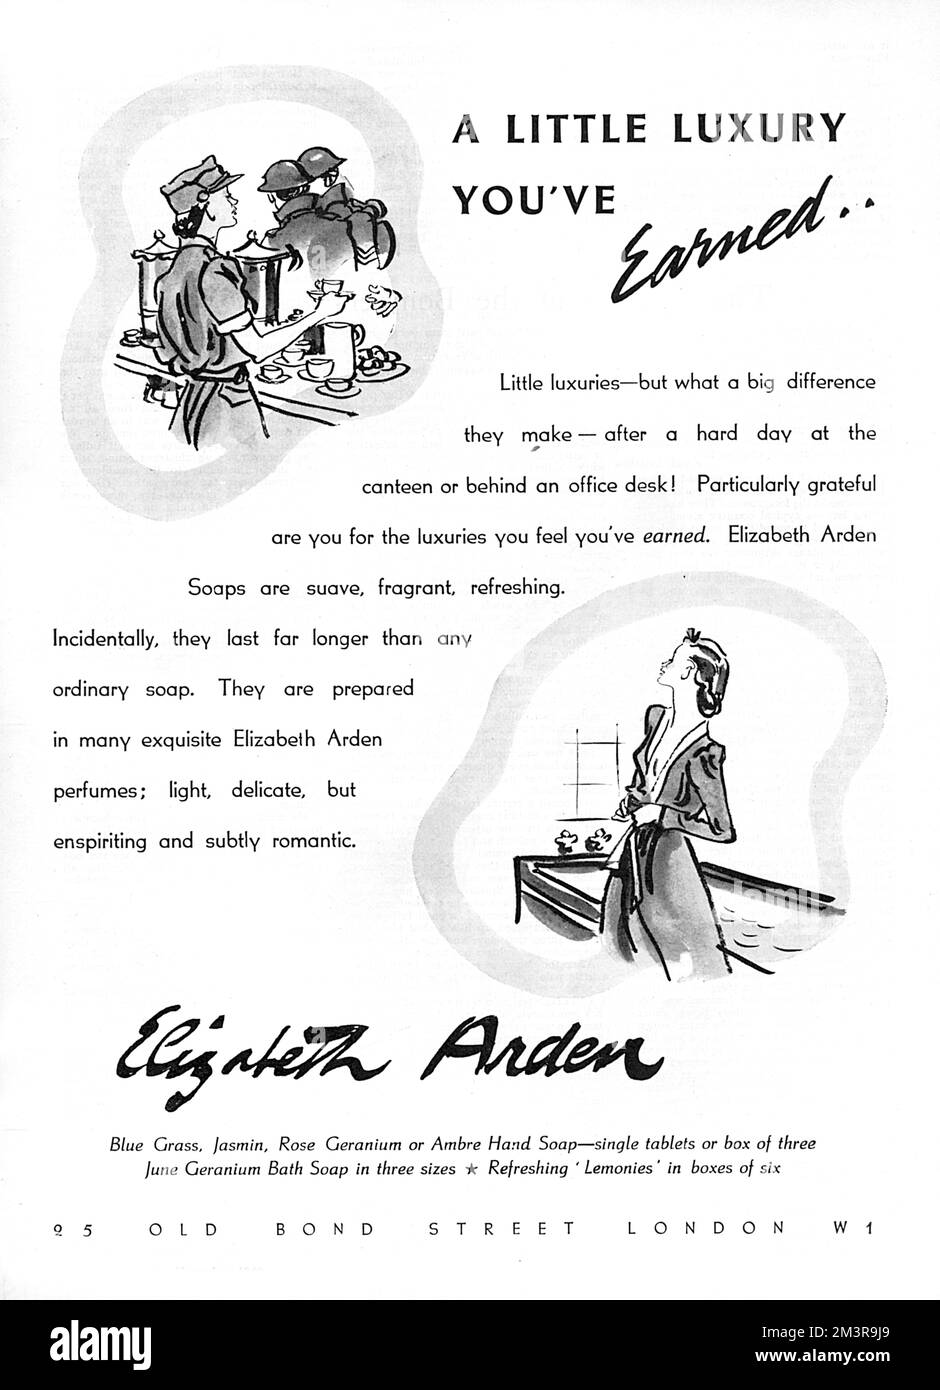 Advertisement for Elizabeth Arden Soaps. A little luxury a woman earned after a hard day during the Second World War. The advertisement reads: &quot;Little luxuries - but what a big difference they make - after a hard day at the canteen or behind an office desk! Particularly grateful are you for the luxuries you feel you've earned. Elizabeth Arden Soaps are suave, fragrant, refreshing. Incidentally, they last for longer than any ordinary soap. They are prepared in many exquisite Elizabeth Arden perfumes; light, delicate, but enspiriting and subtly romantic.&quot;     Date: 1940 Stock Photo